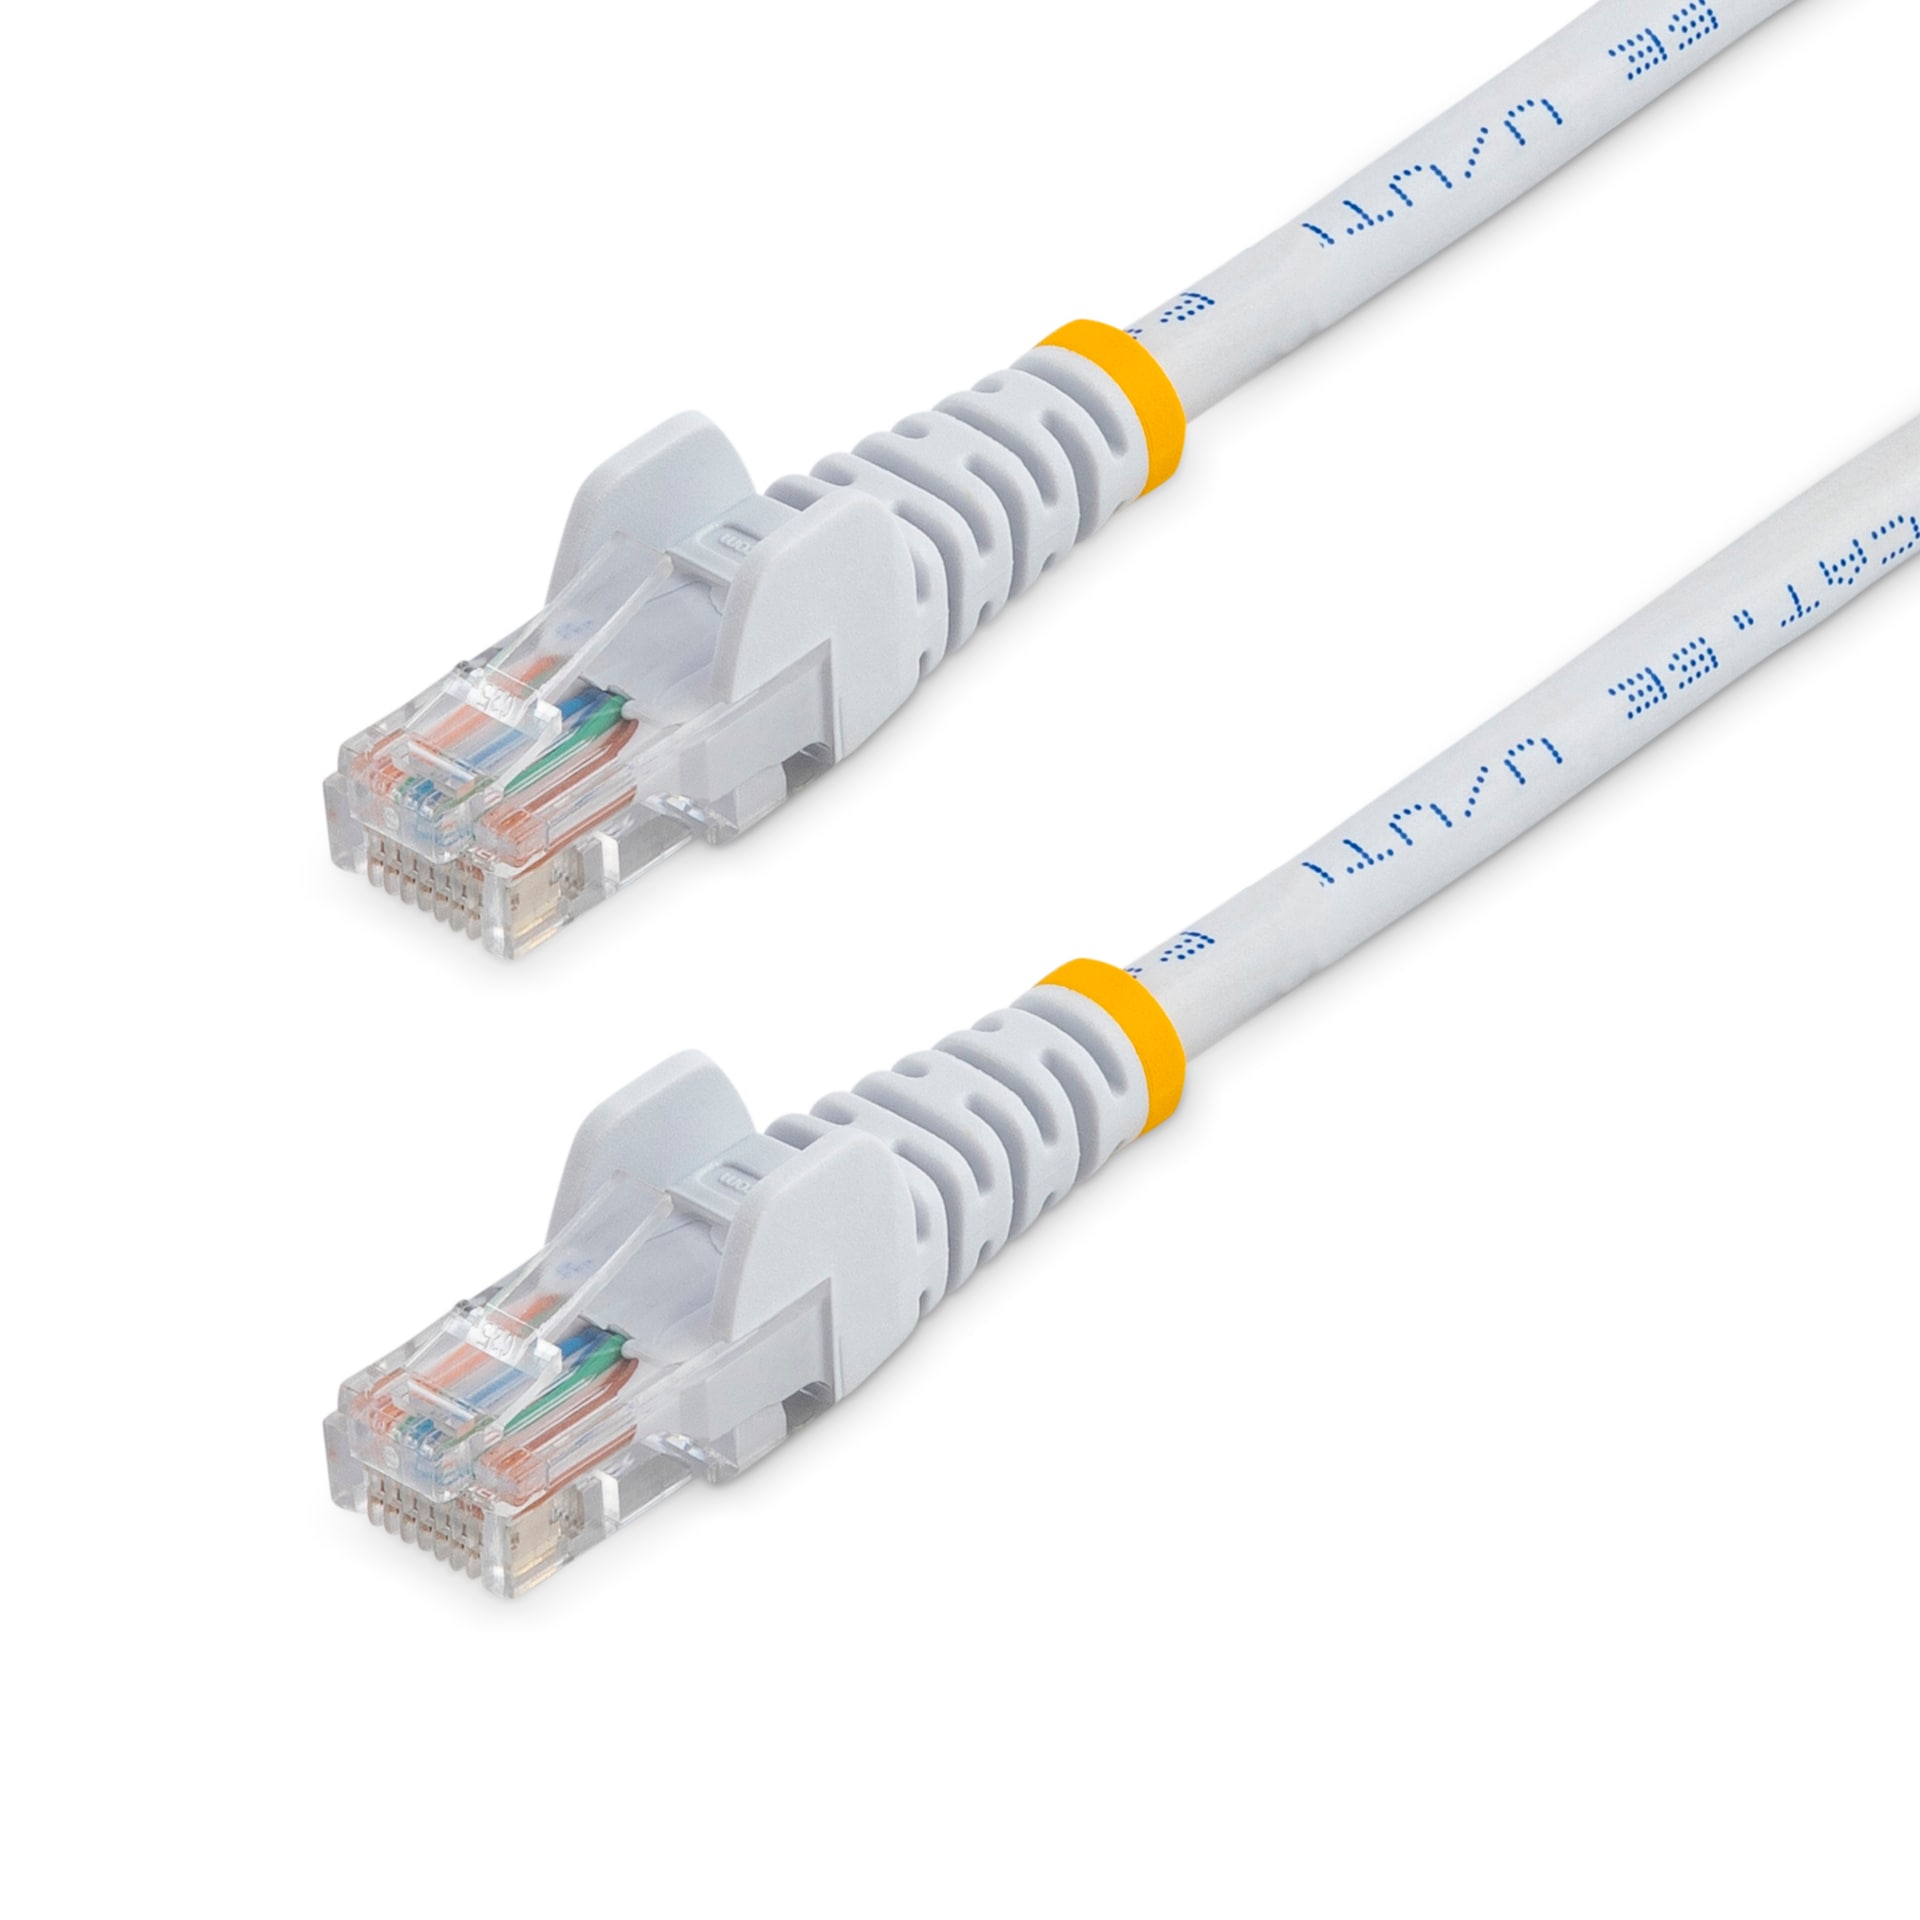 StarTech.com Cat5e Ethernet Cable 7 ft White - Cat 5e Snagless Patch Cable